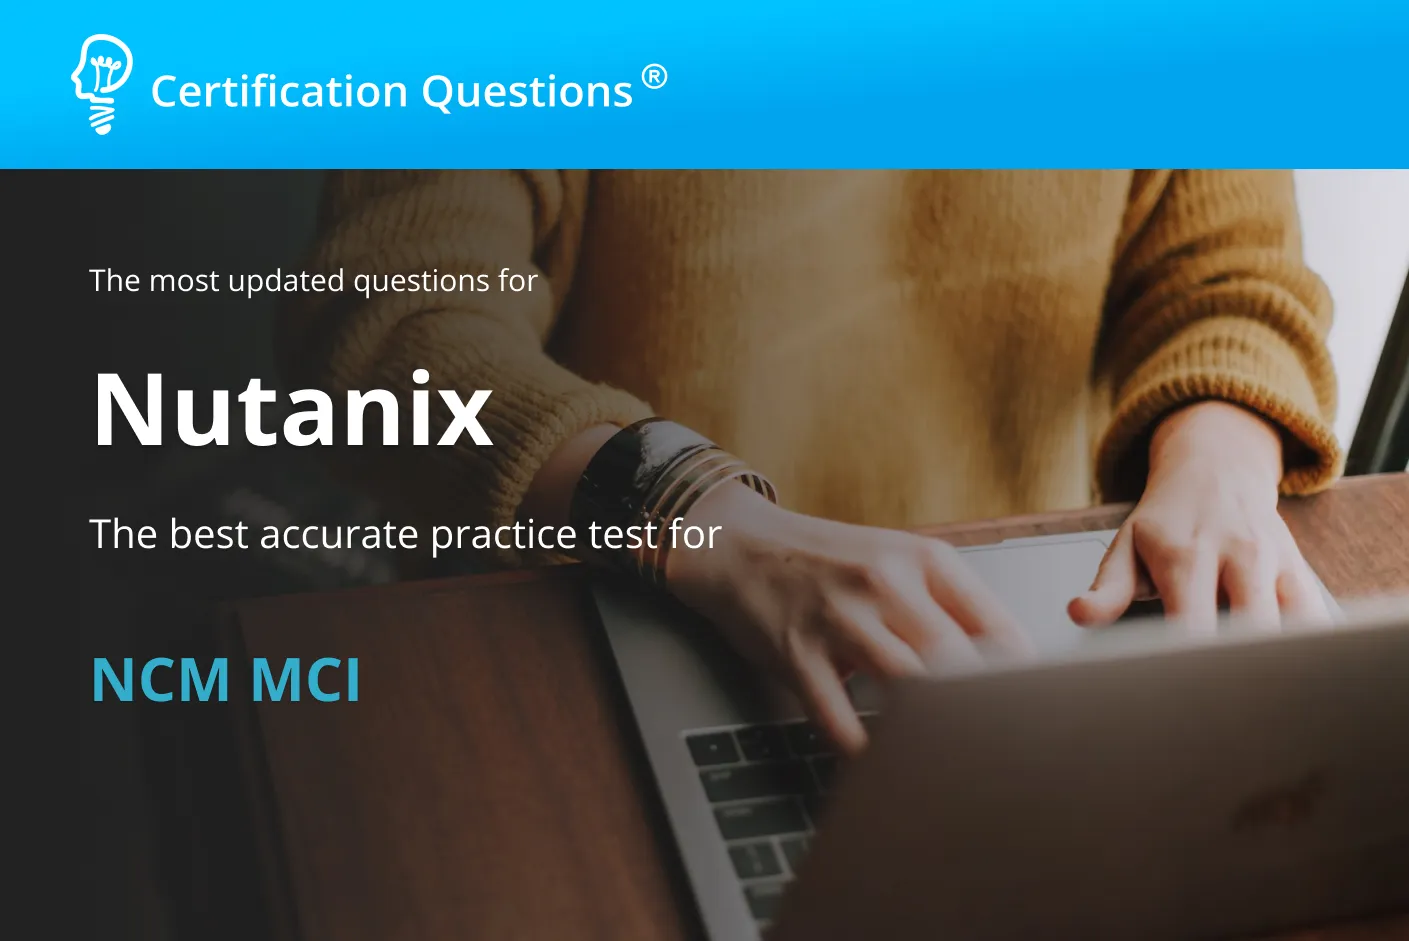 This image represents the Nutanix NCM MCI Exam in the USA